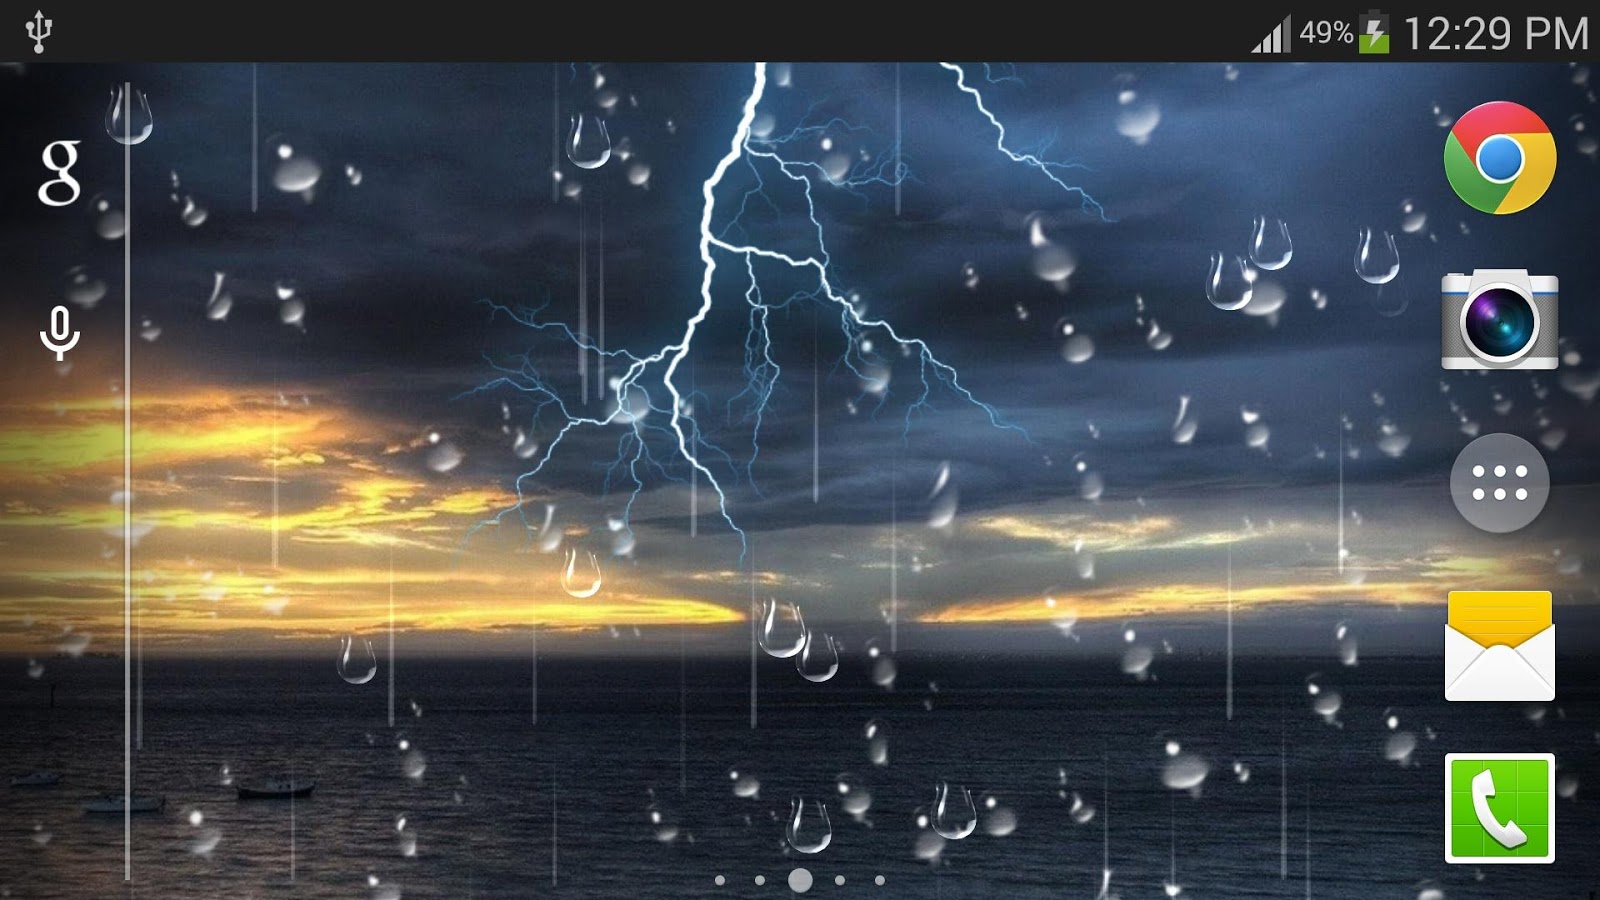 Thunder Storm Live Wallpaper Android Apps On Google Play